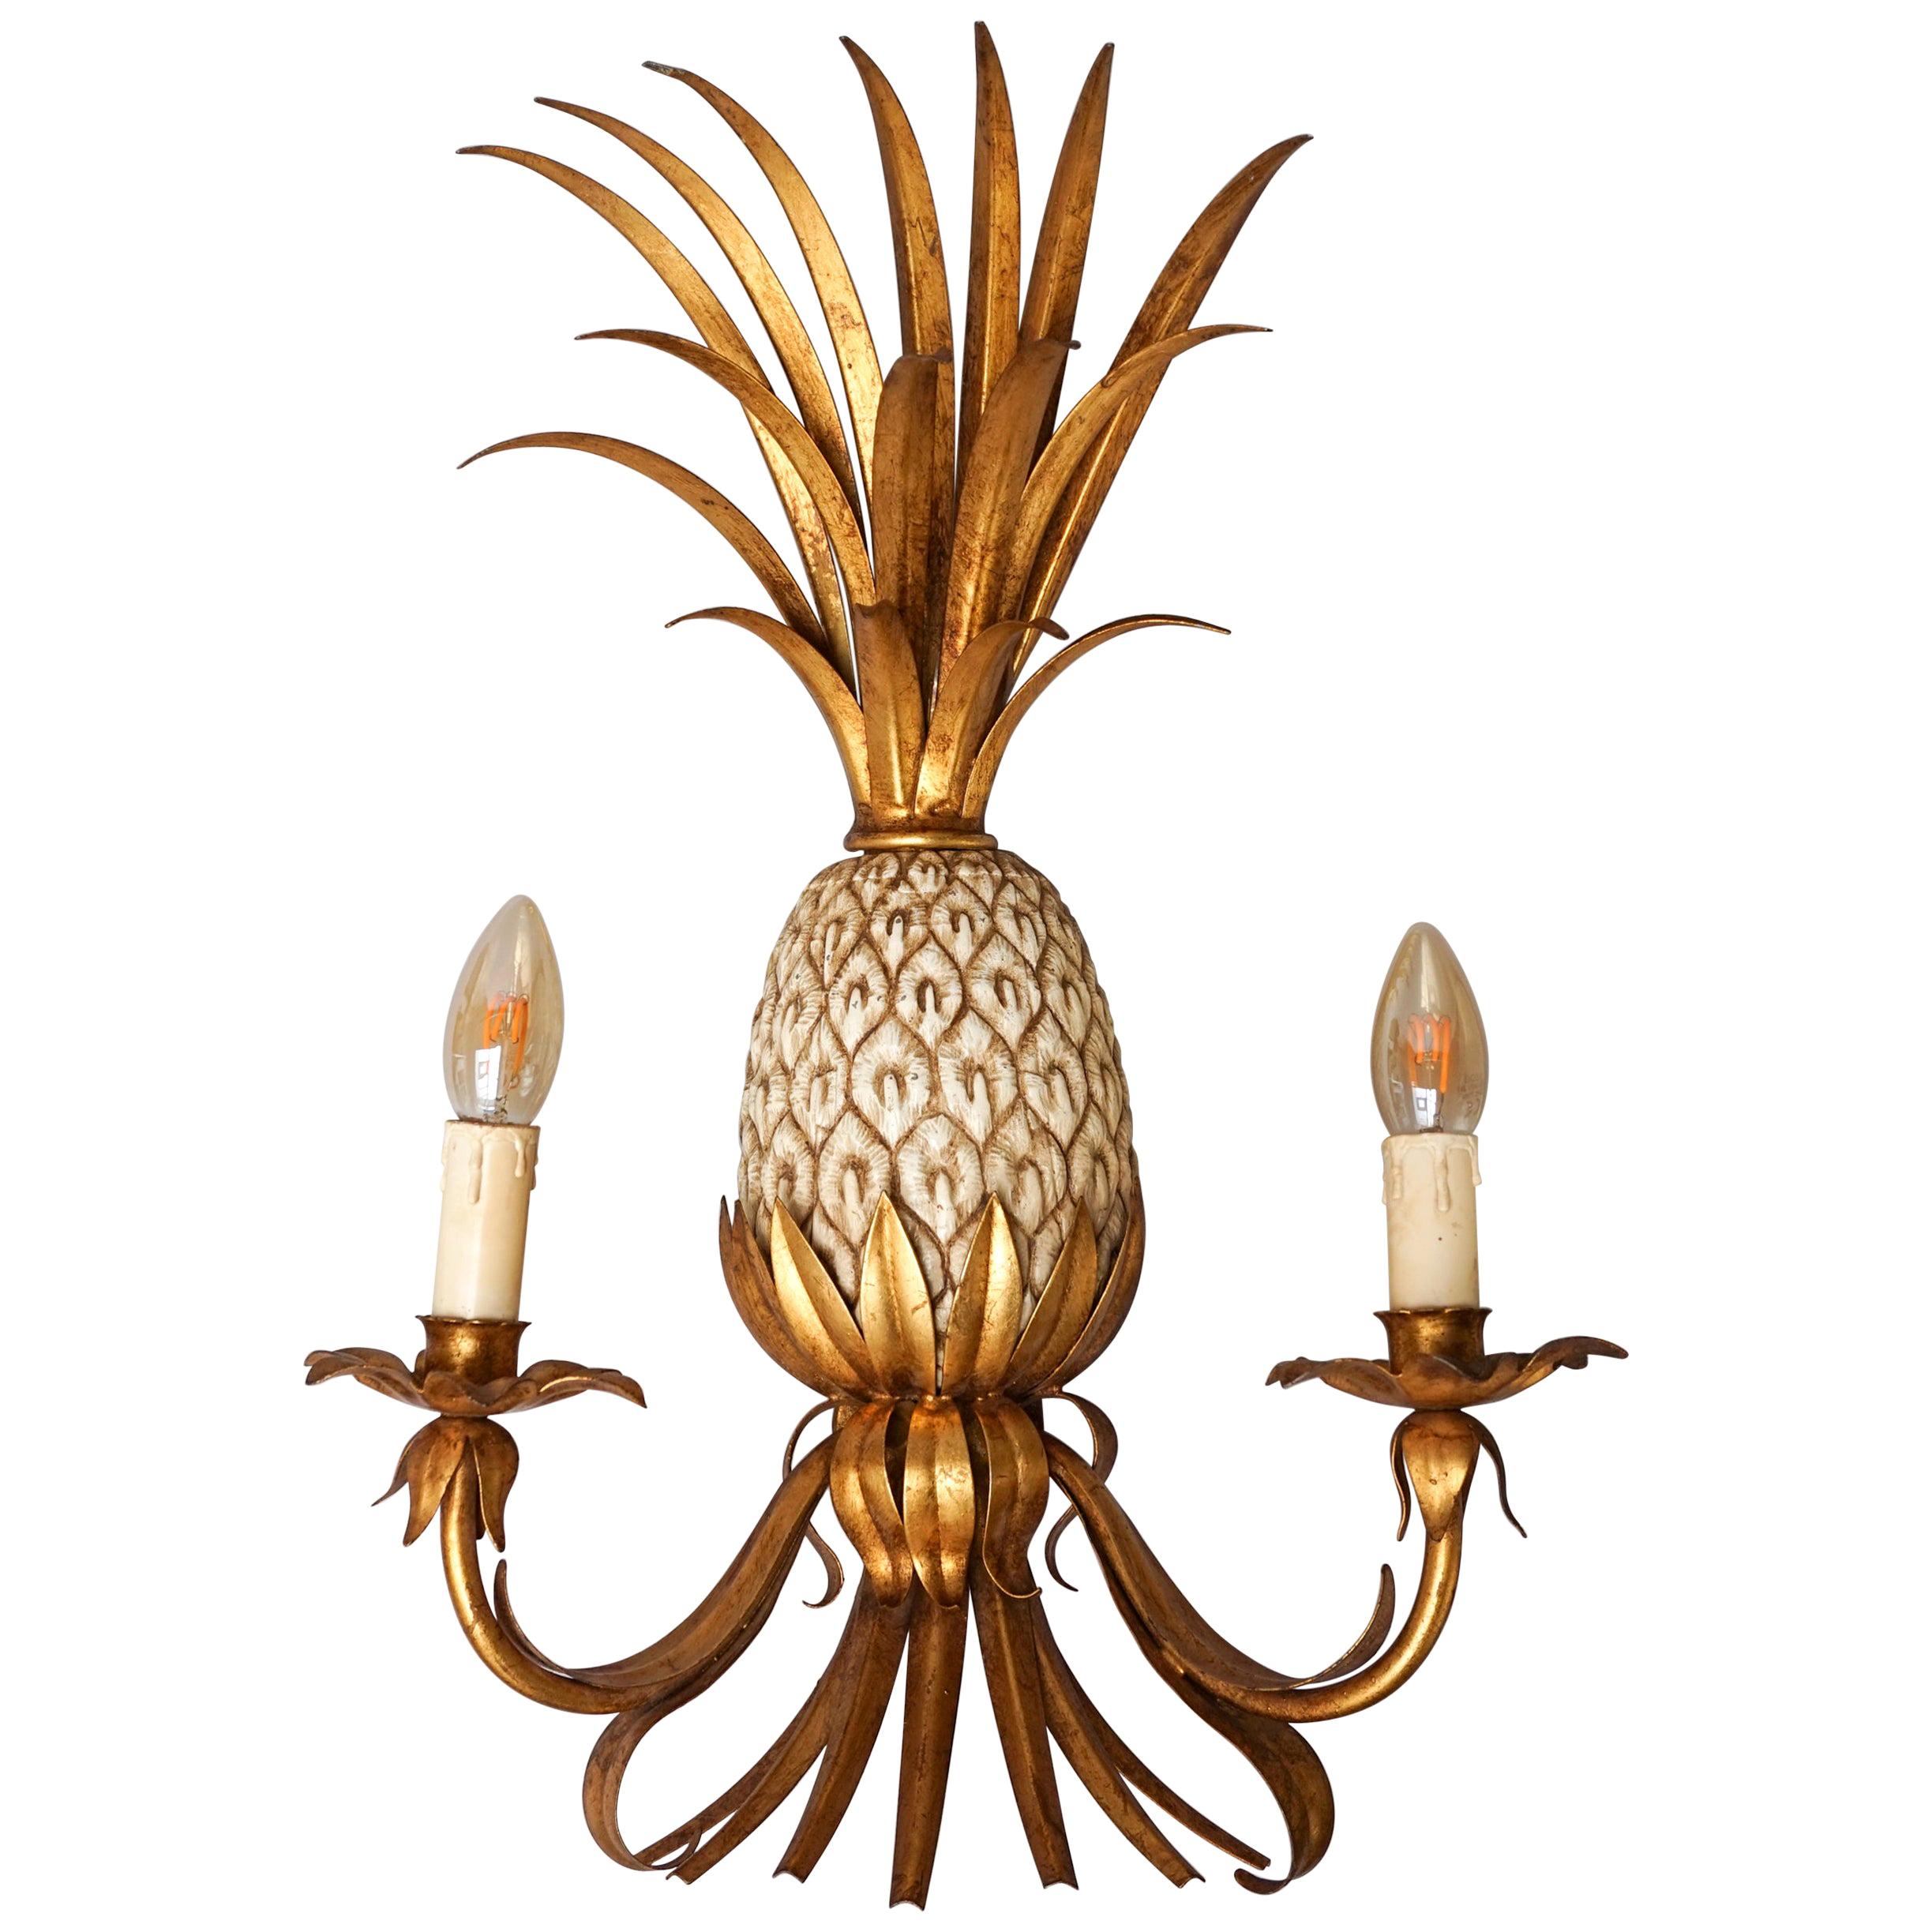 Midcentury French Hollywood Regency Pineapple Maison Charles Style Wall Sconce